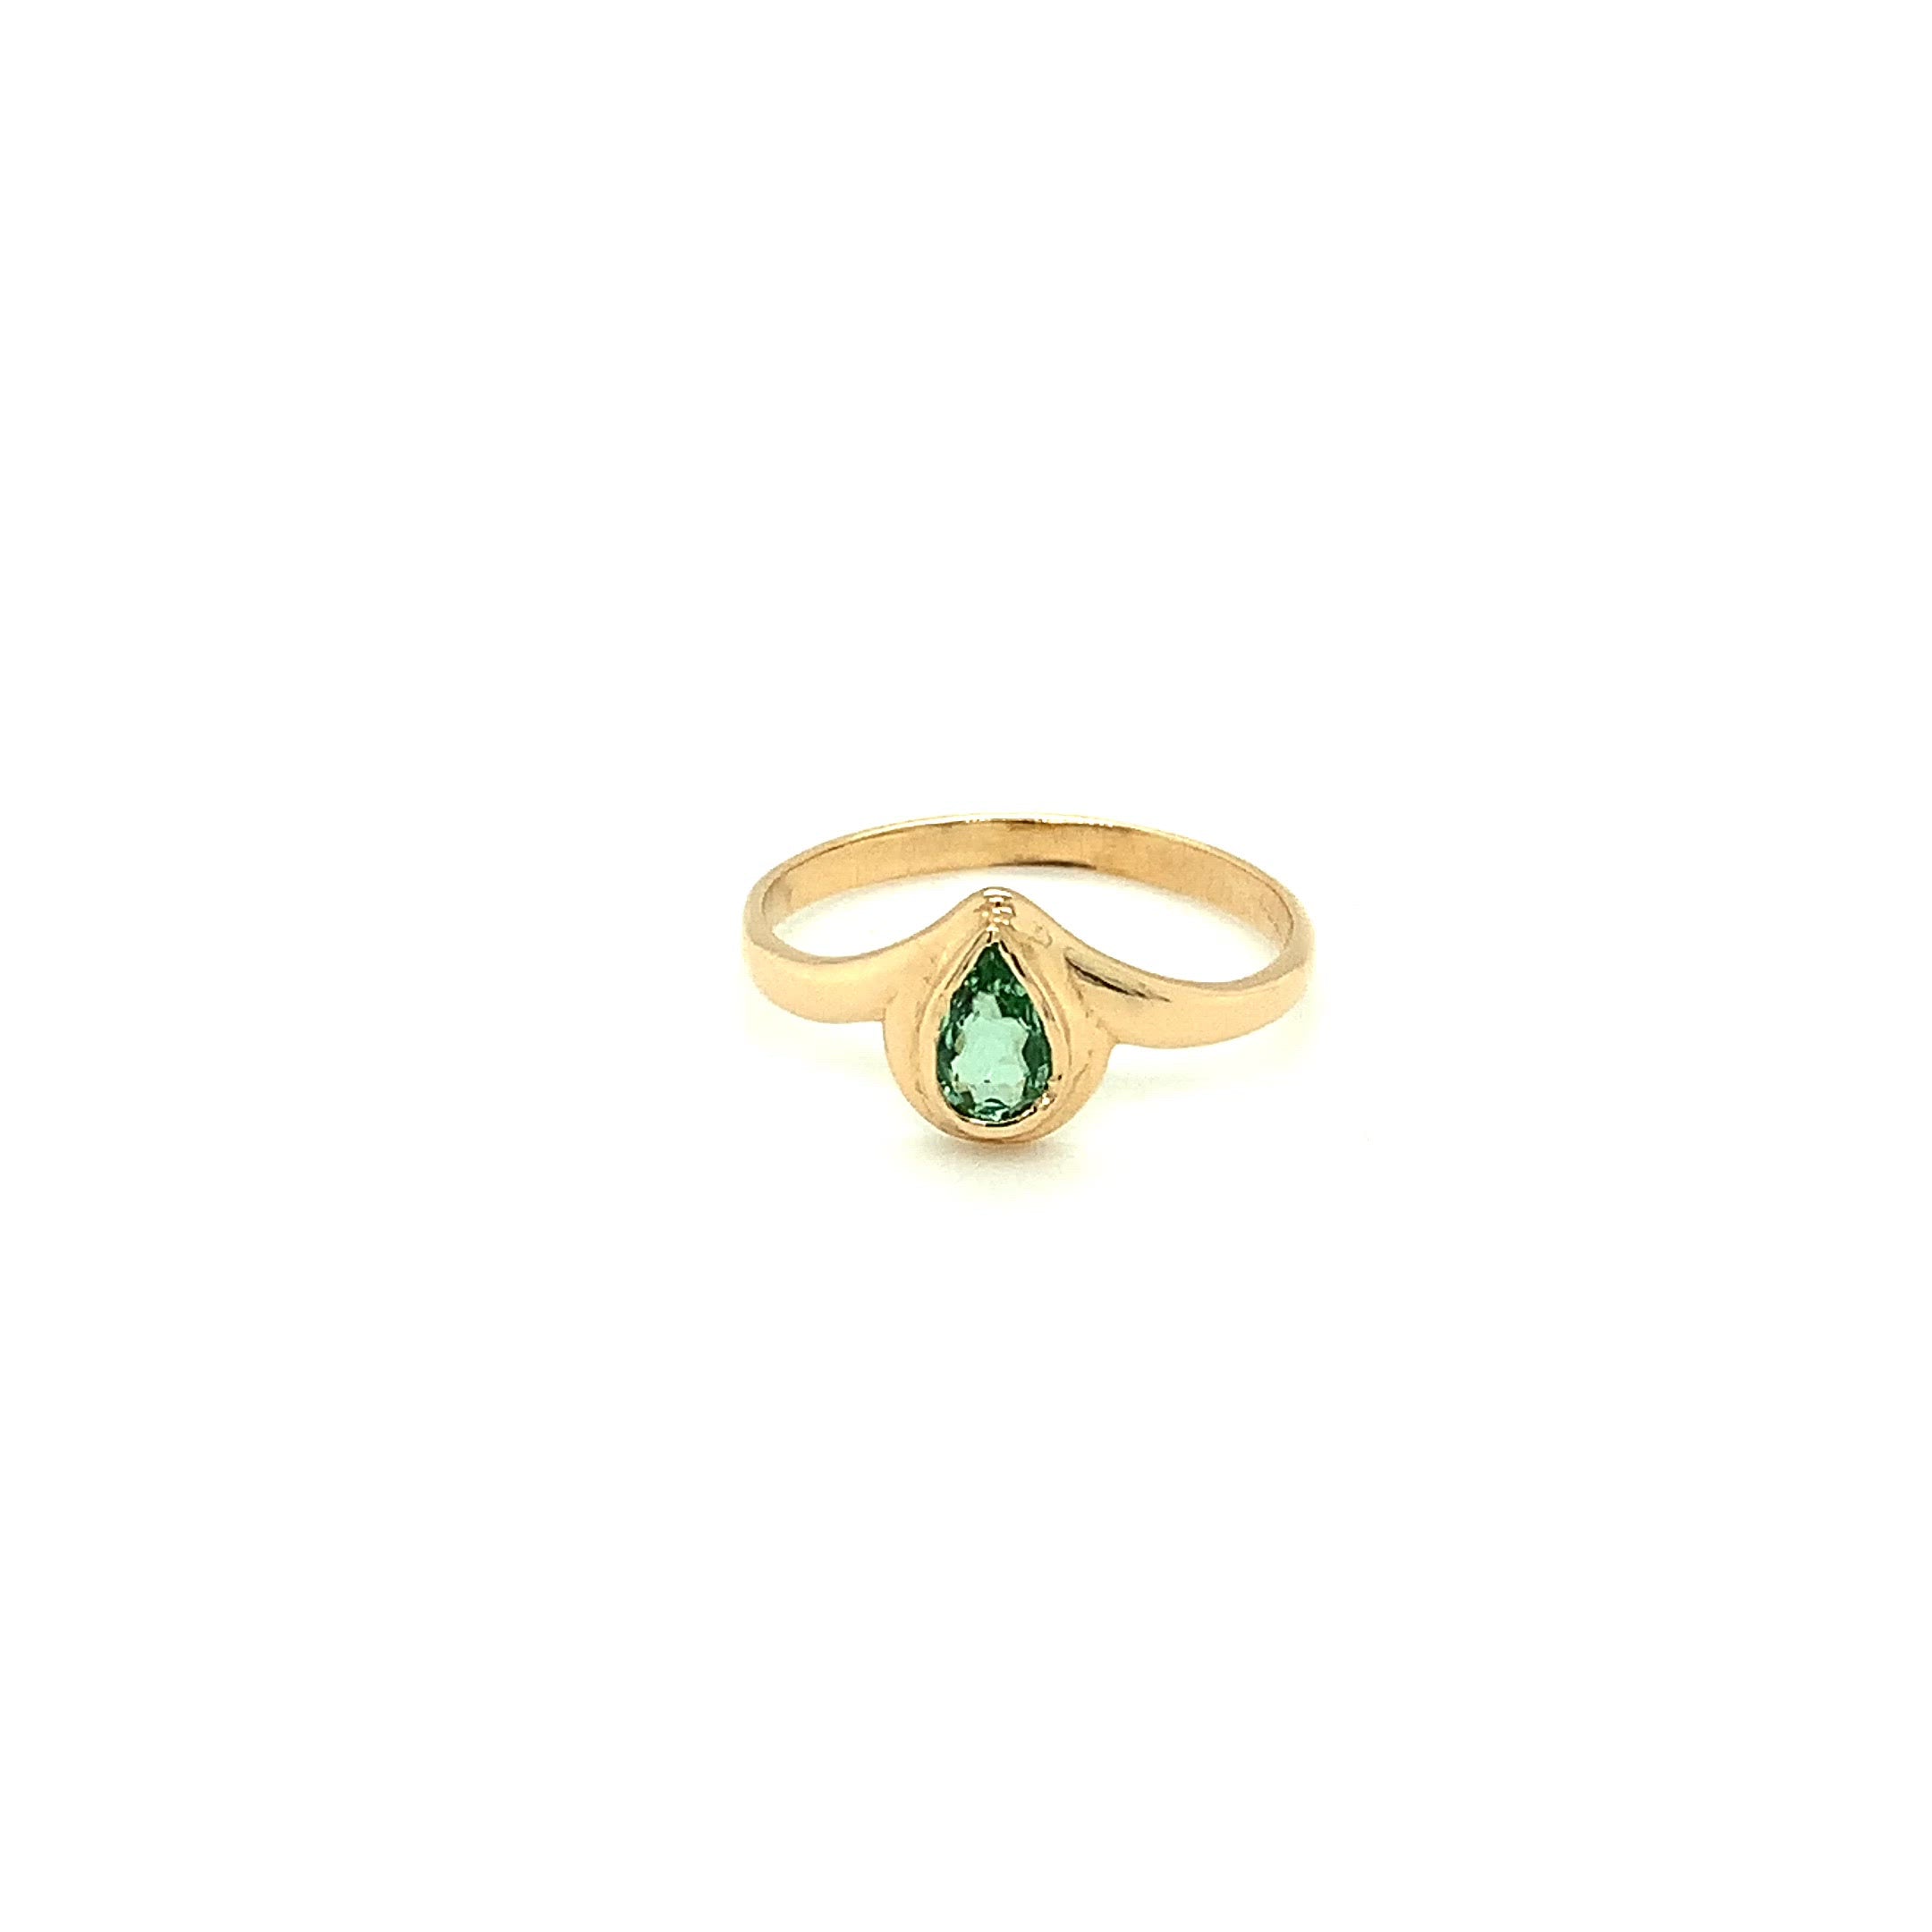 Natural Paraiba Tourmaline Ring 18K Solid Gold .40ct Solitaire Ring Fine Women's Ring Estate Jewelry Gemstone Ring Statement Ring Birthstone